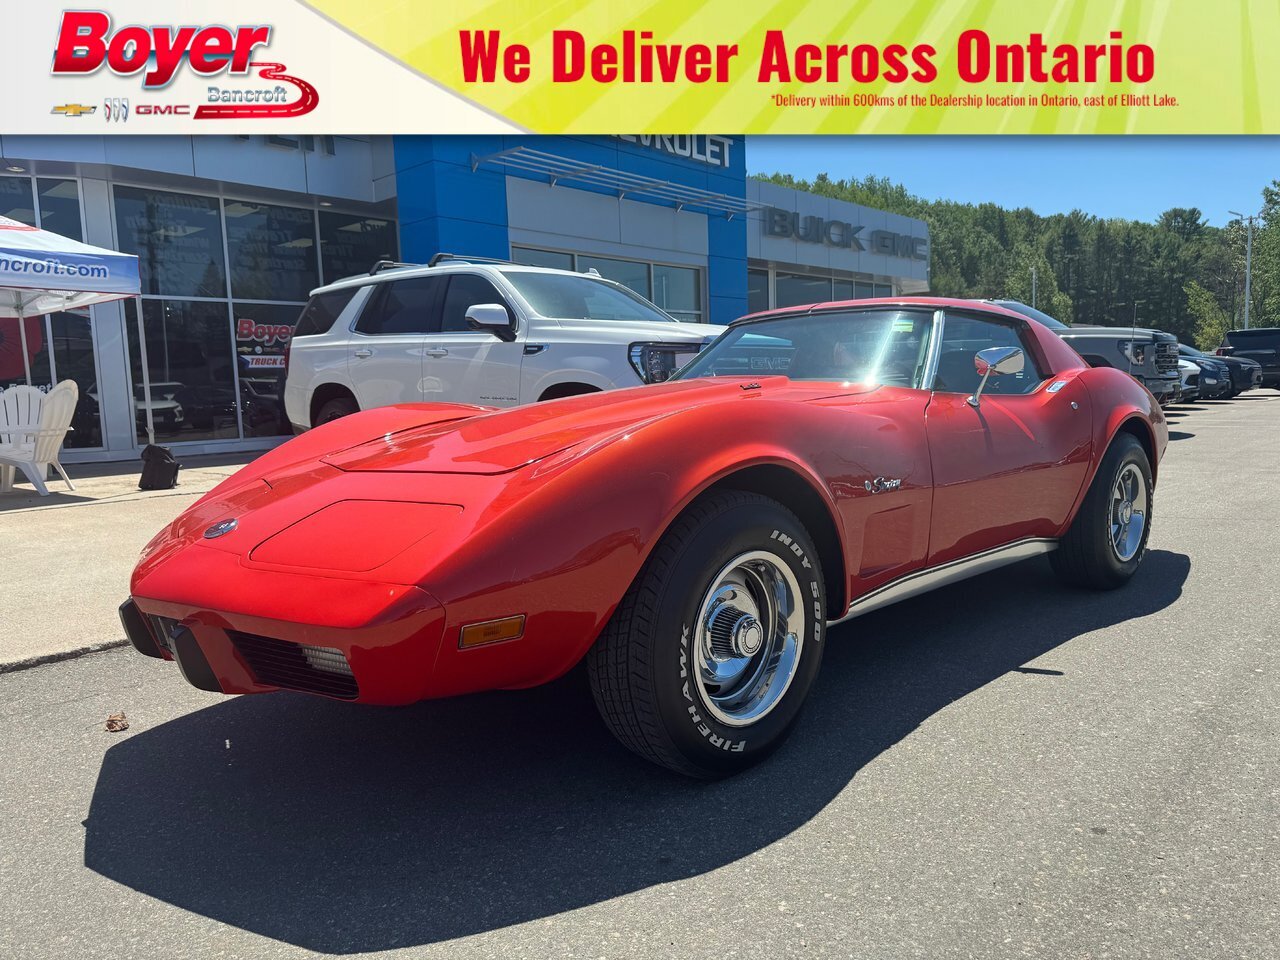 1976 Chevrolet Corvette N/A V8Power|ClassicDesign|IconicStingray|Removable